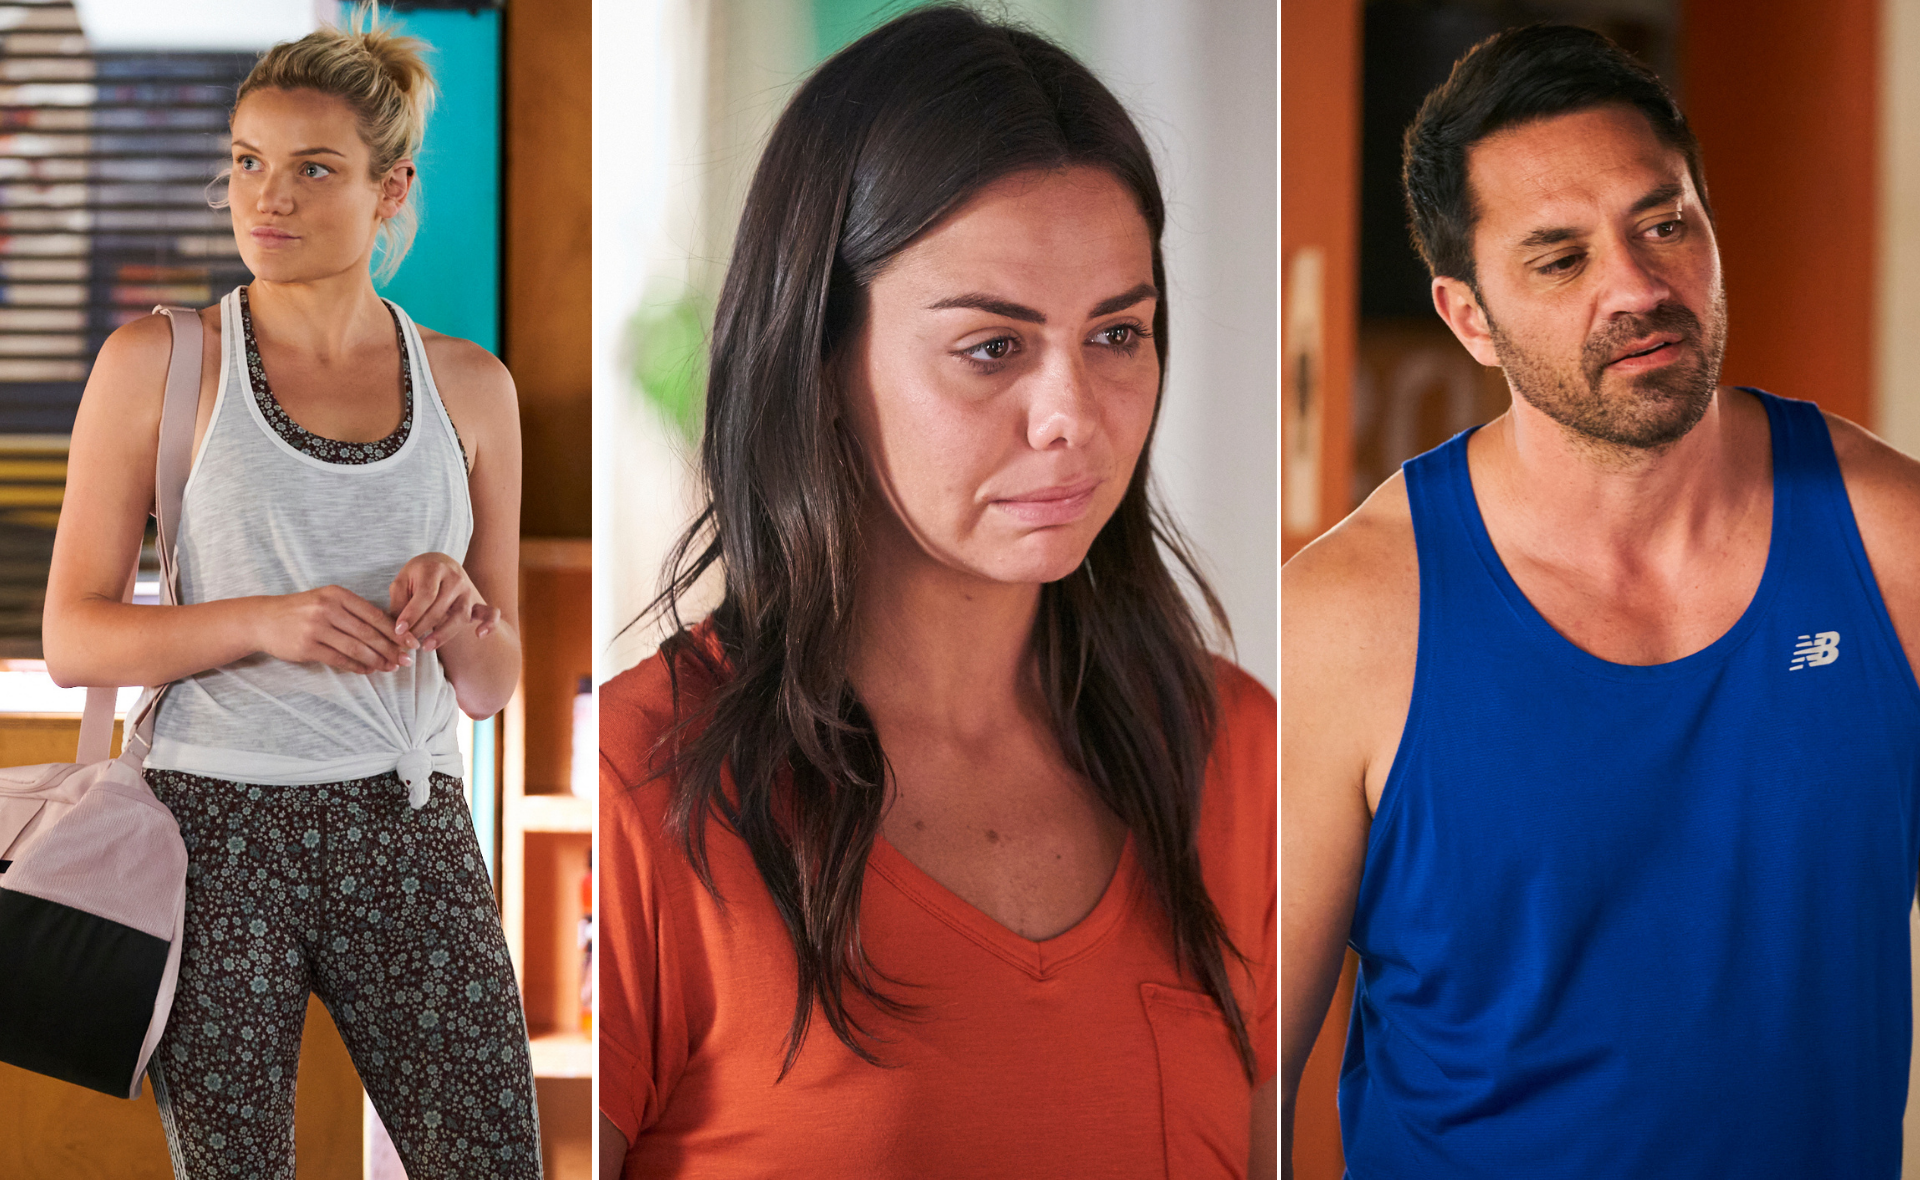 Home And Away shock love child! Ari breaks up with Mackenzie… who is secretly carrying his child